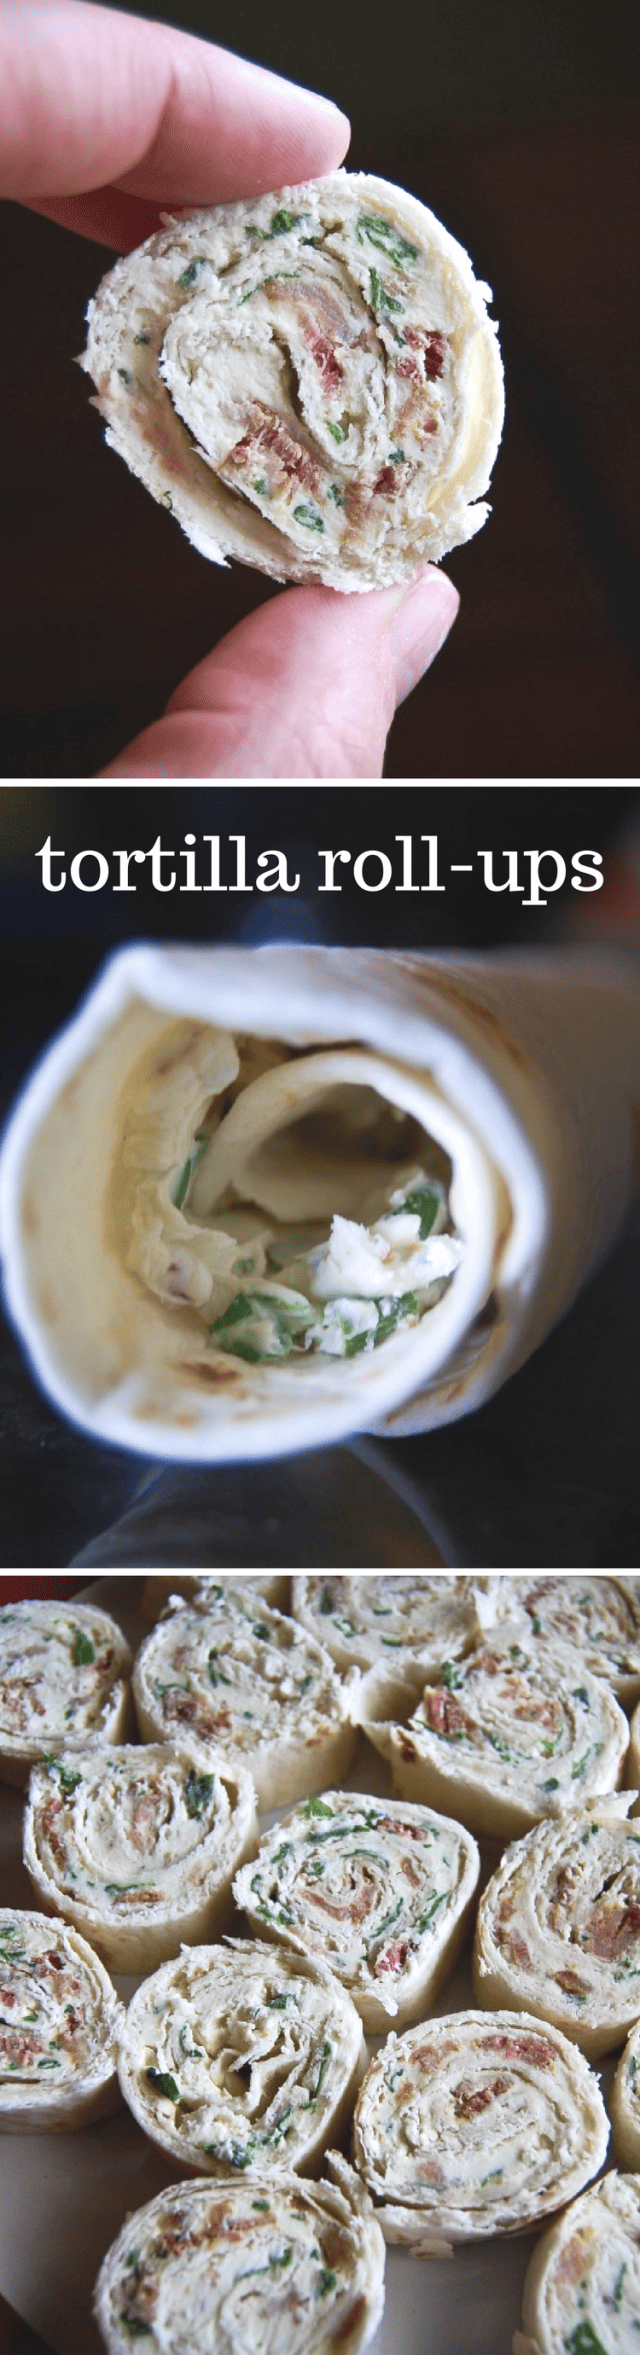 Bacon, Spinach, Green Onion and Cream Cheese Tortilla Roll-Ups Appetizer Recipe